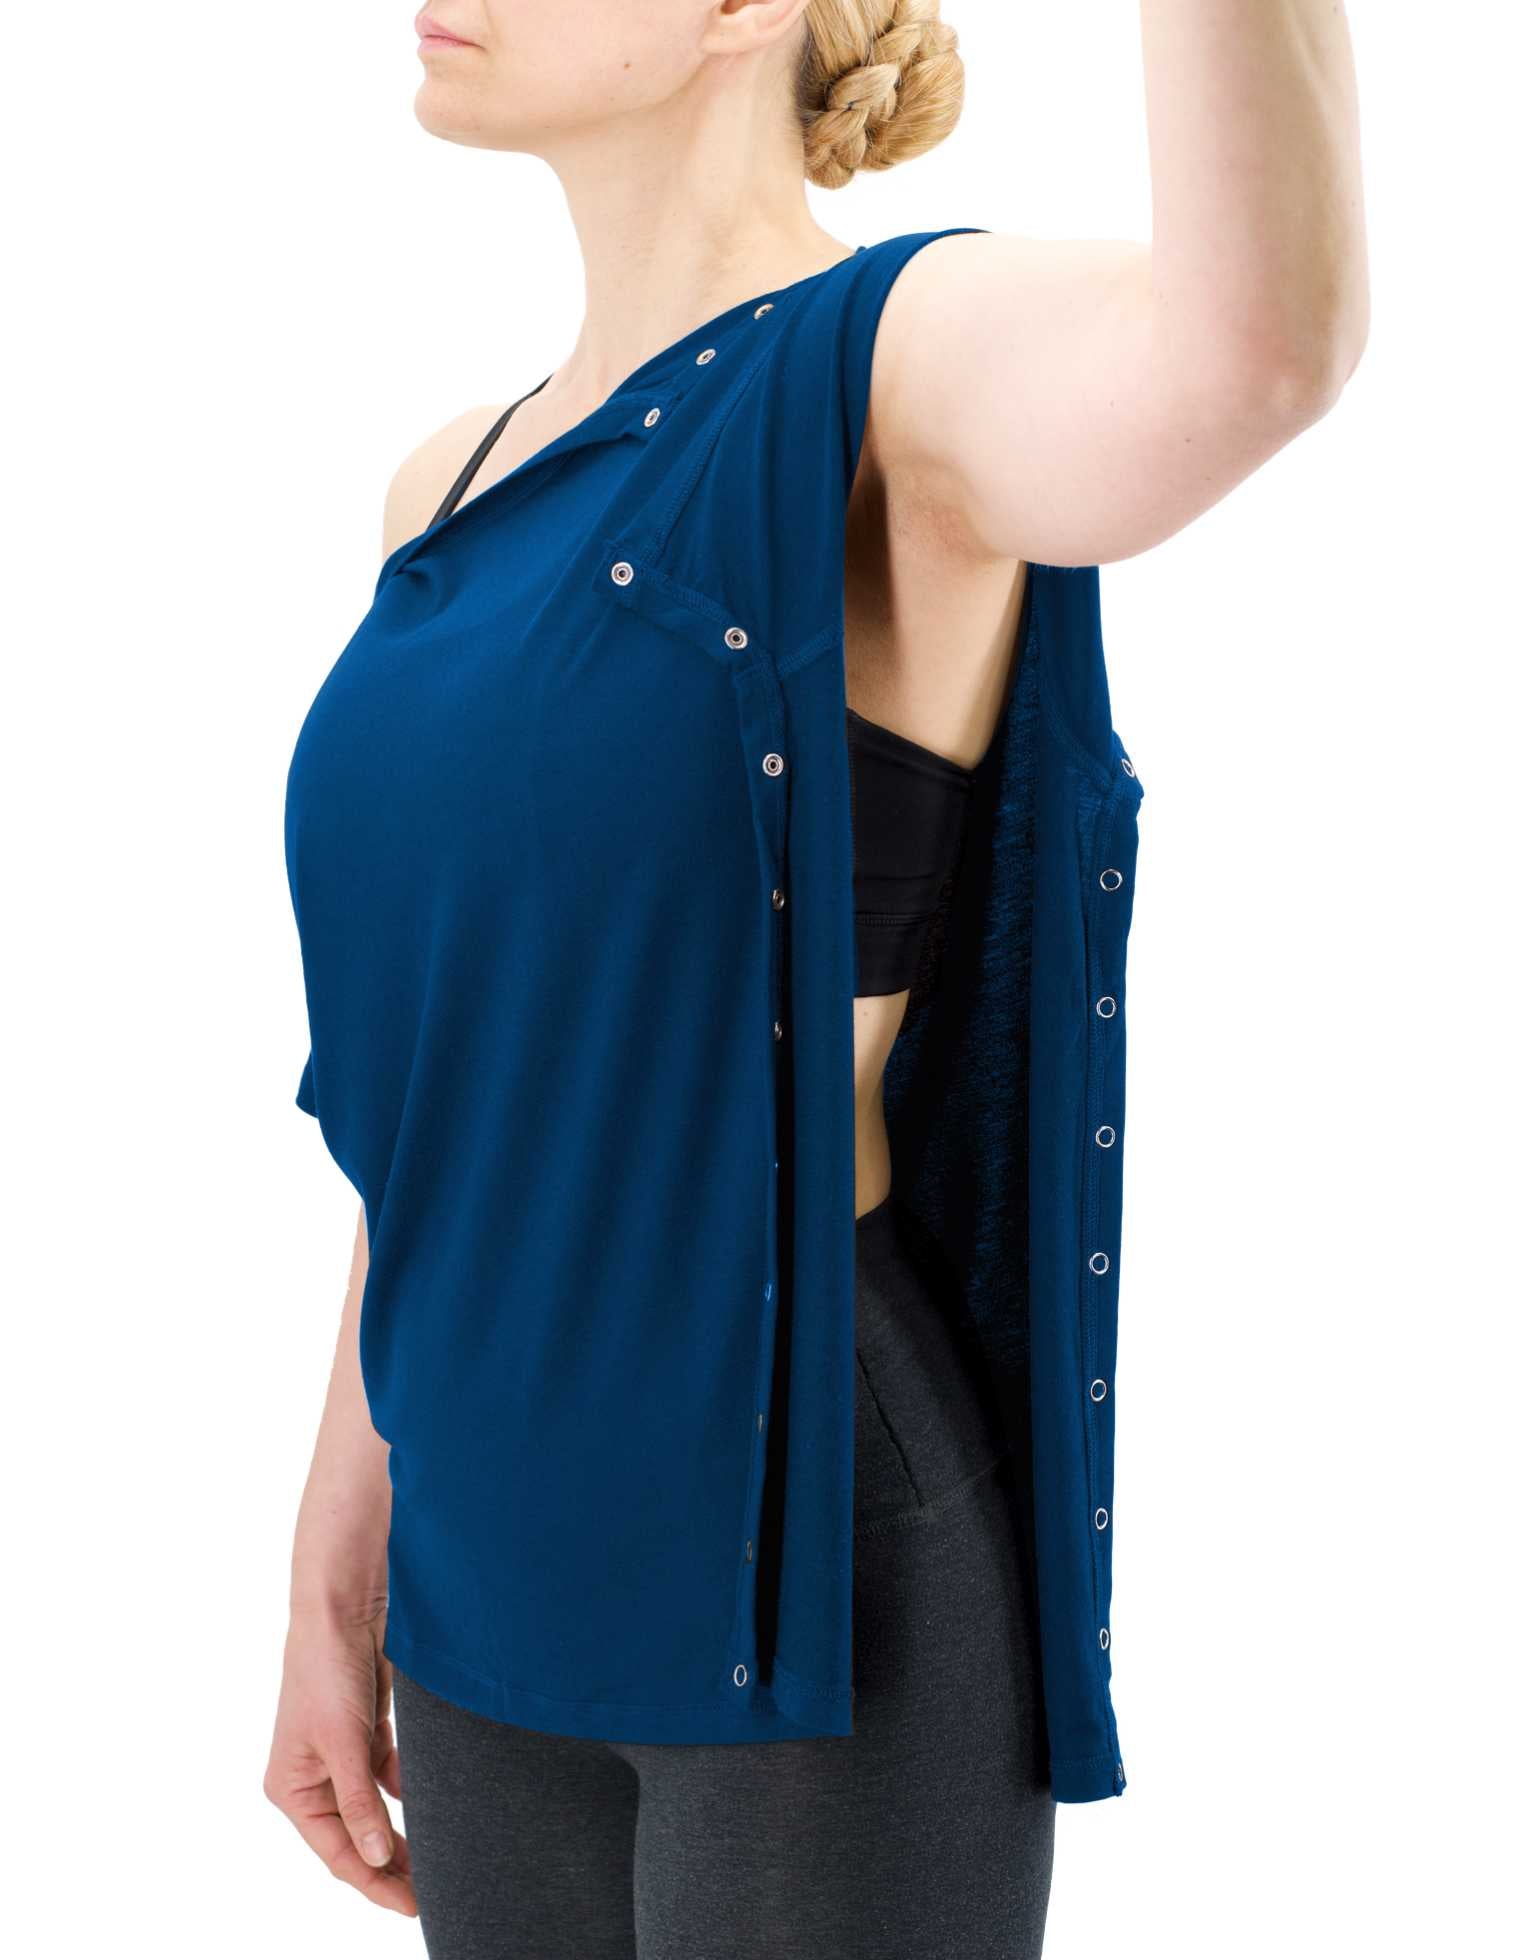 How to Put on a Shirt After Shoulder Surgery: Step-by-Step Guide Renova Medical Wear Inc